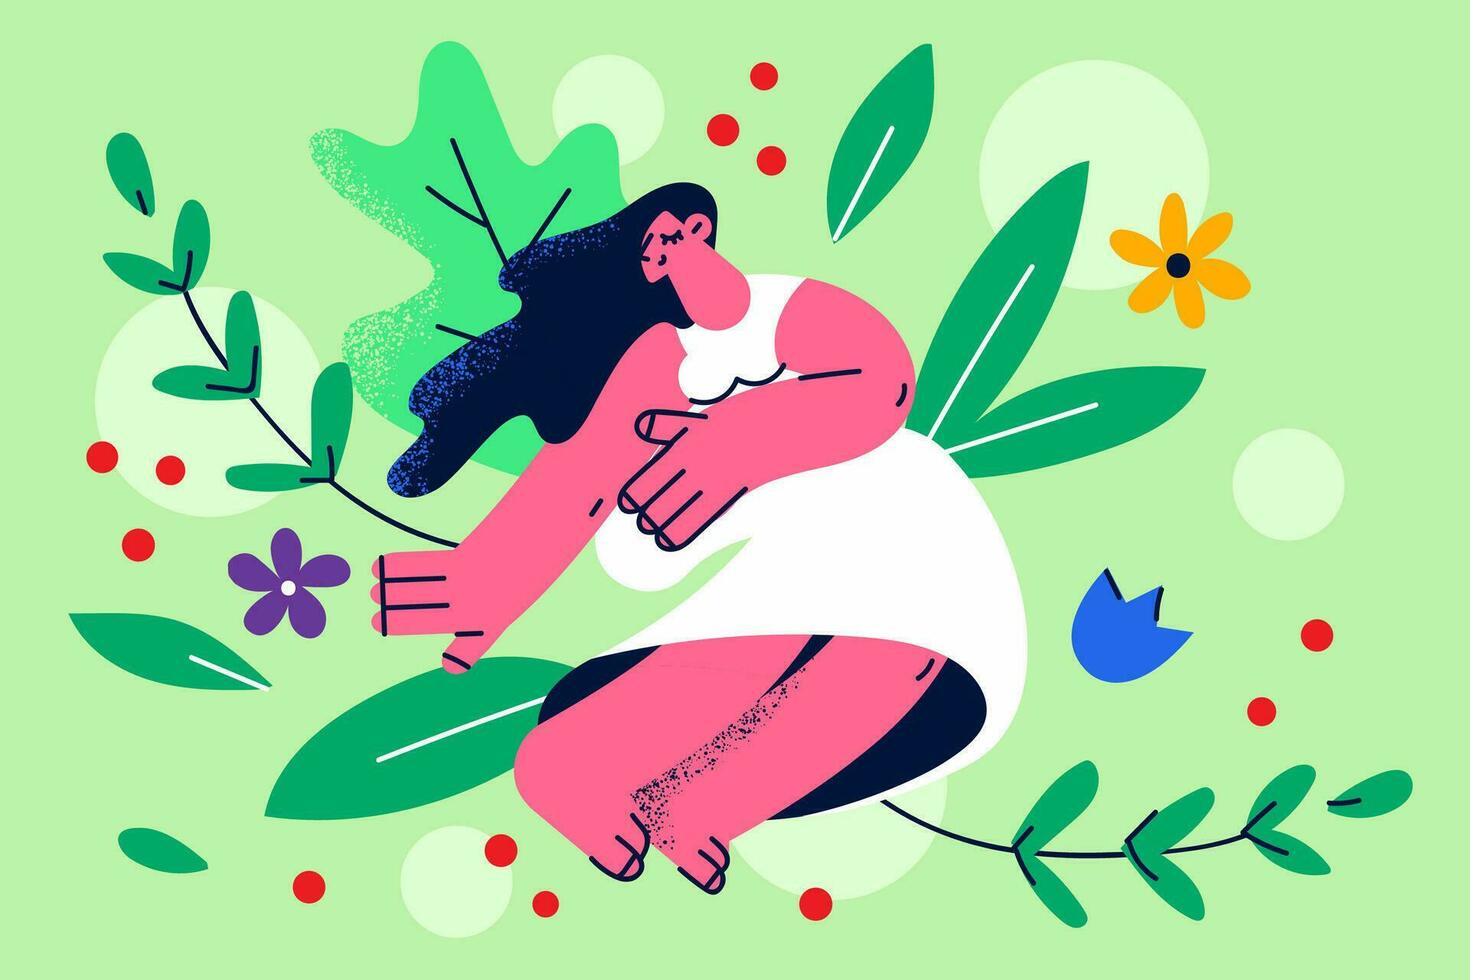 Happy young woman sit in flowers show love and care to nature. Smiling millennial girl surrounded by floral composition and greenery demonstrate female mental health stability. Vector illustration.